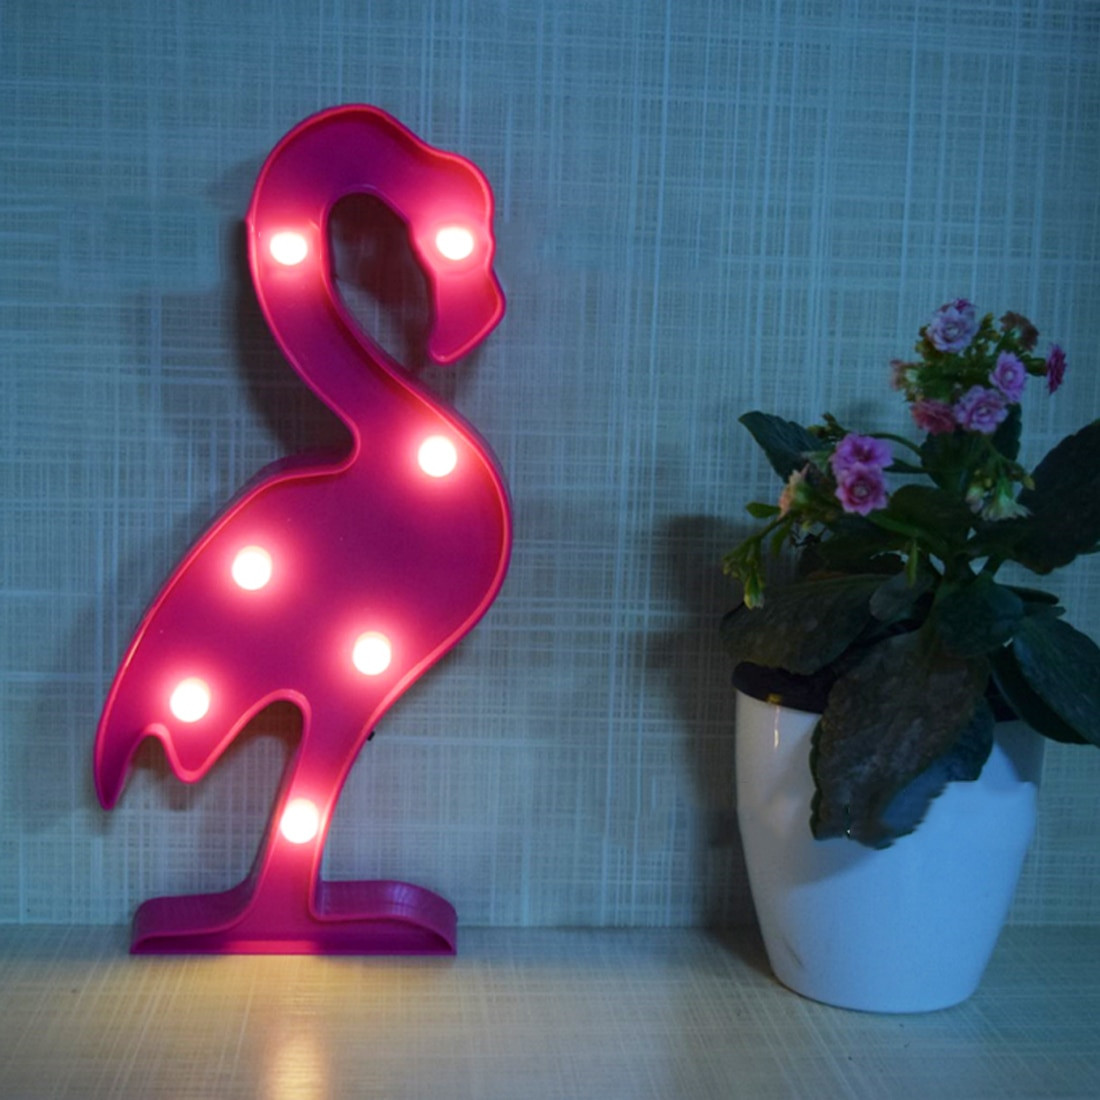 11 attractive Lamp Vase Cap 2024 free download lamp vase cap of luminary 3d led flamingo lamp pineapple cactus clouds nightlight for luminary 3d led flamingo lamp pineapple cactus clouds nightlight romantic light table lamp for christmas